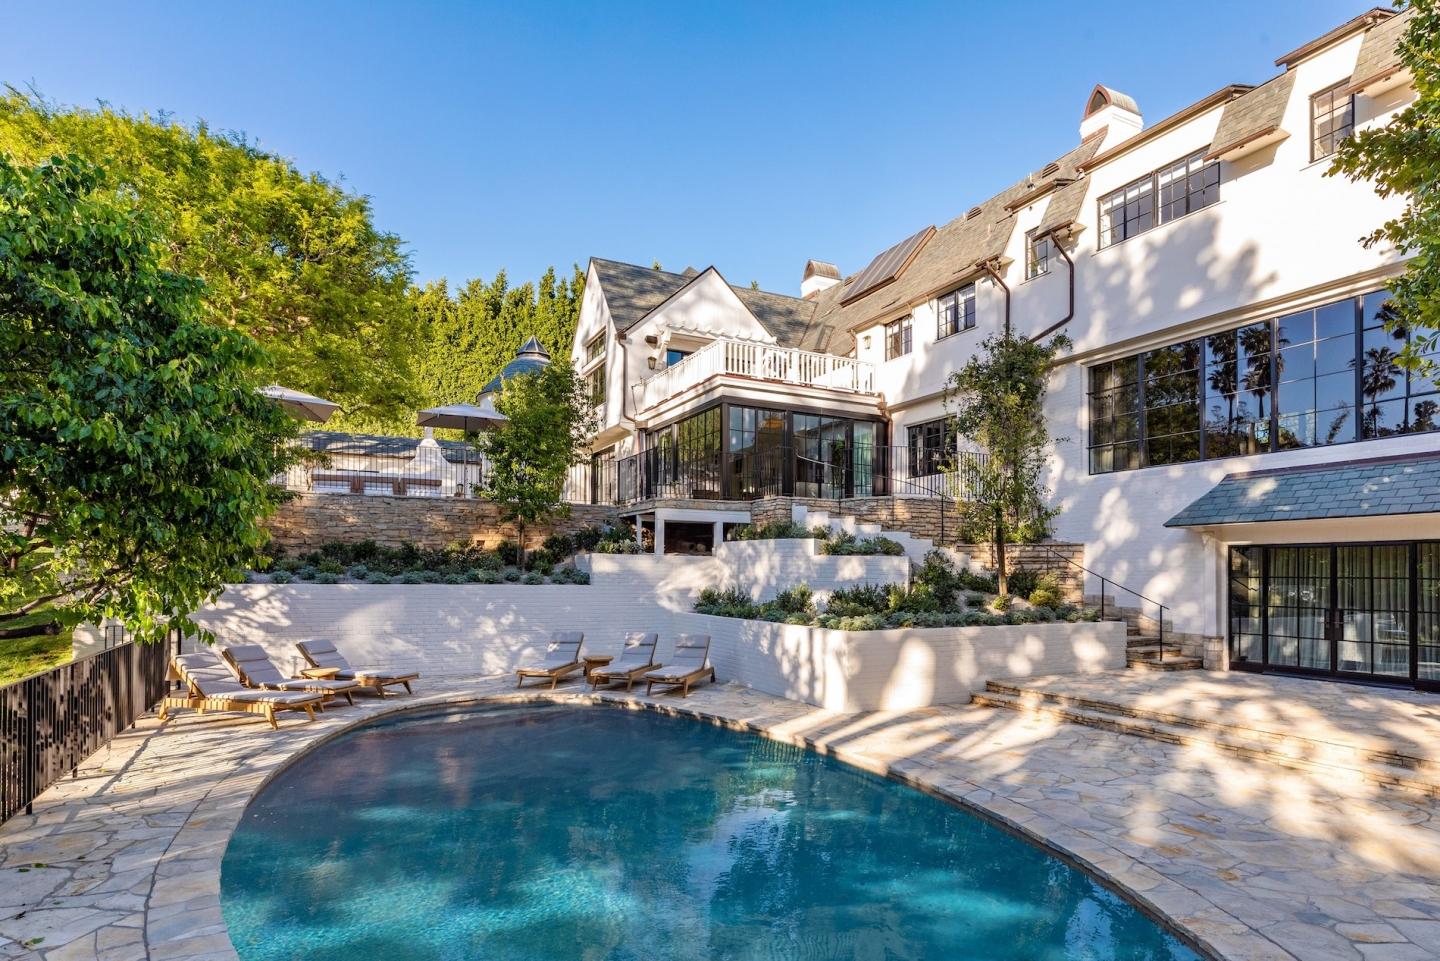 The home boasts superior privacy, located behind gates within a secluded stretch of Beverly Hills